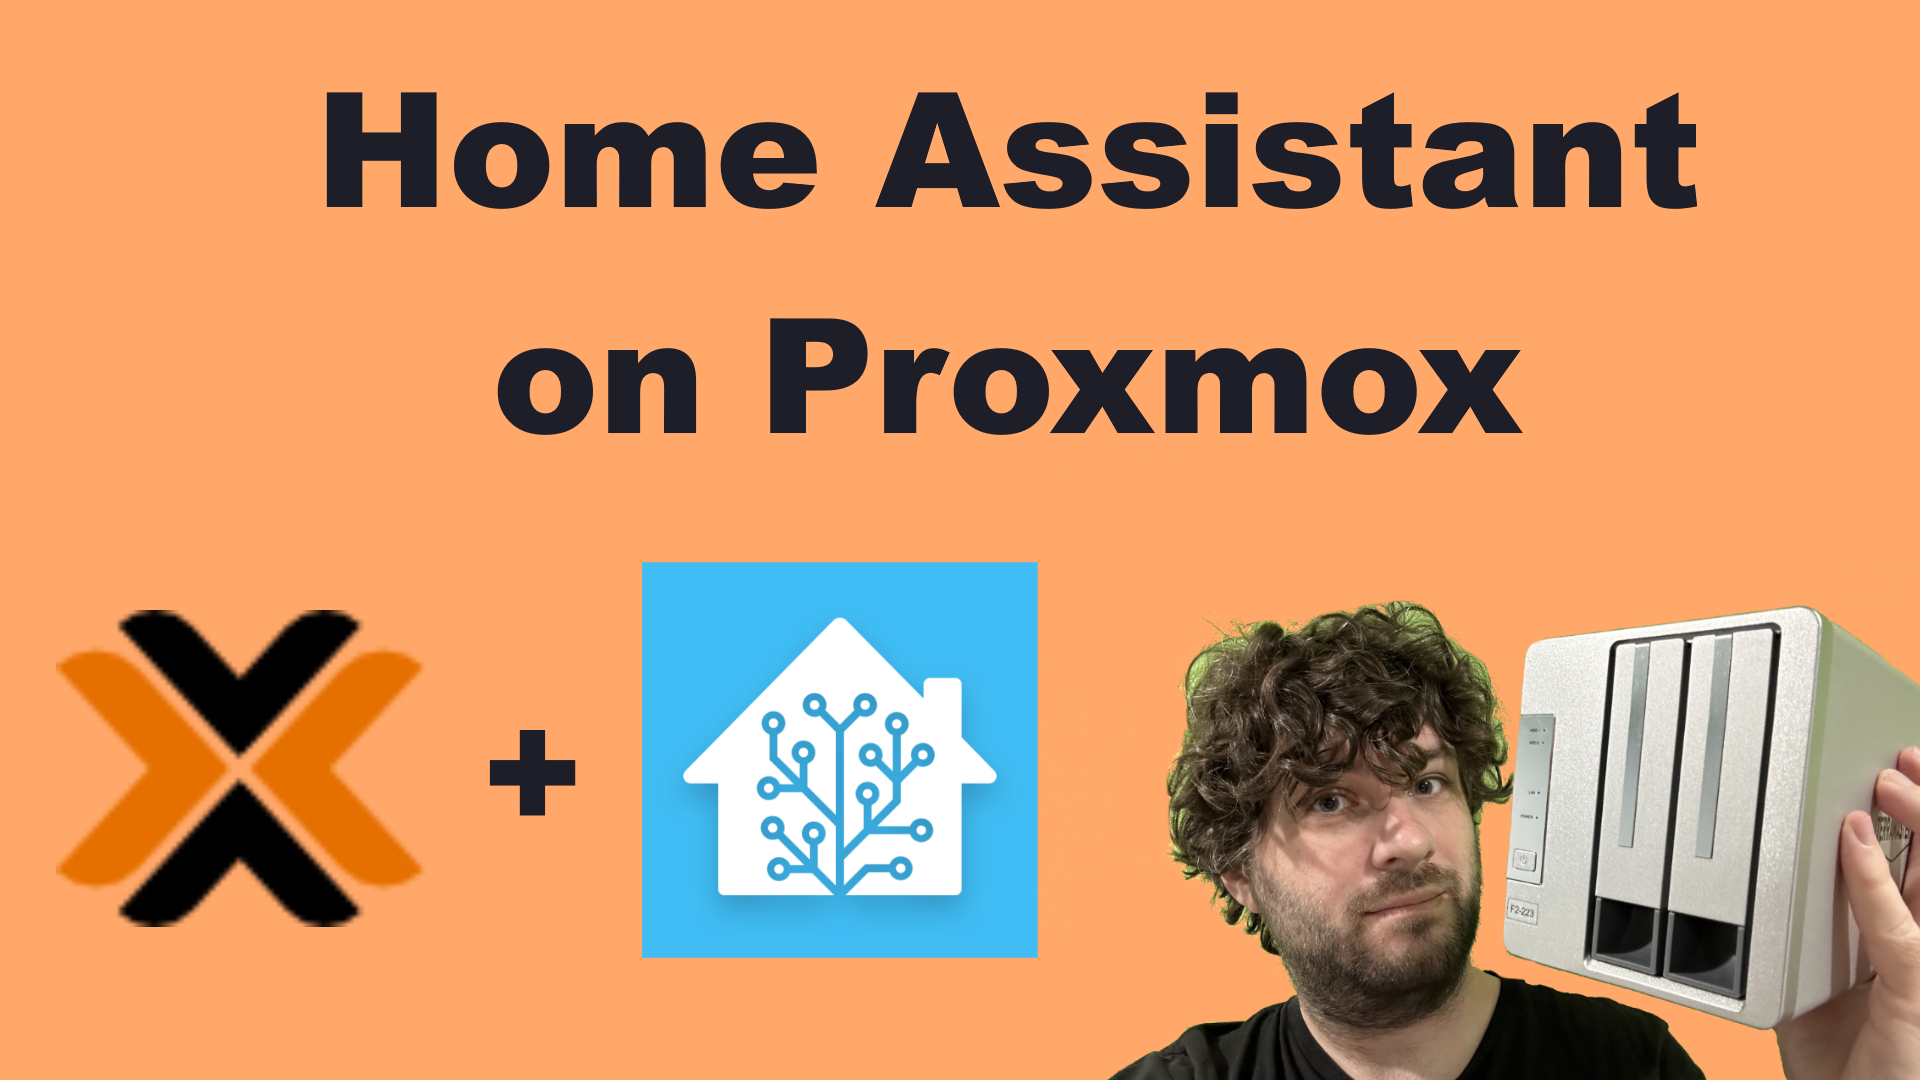 Take Control of your Smarthome with Home Assistant! Installation Tutorial on Proxmox